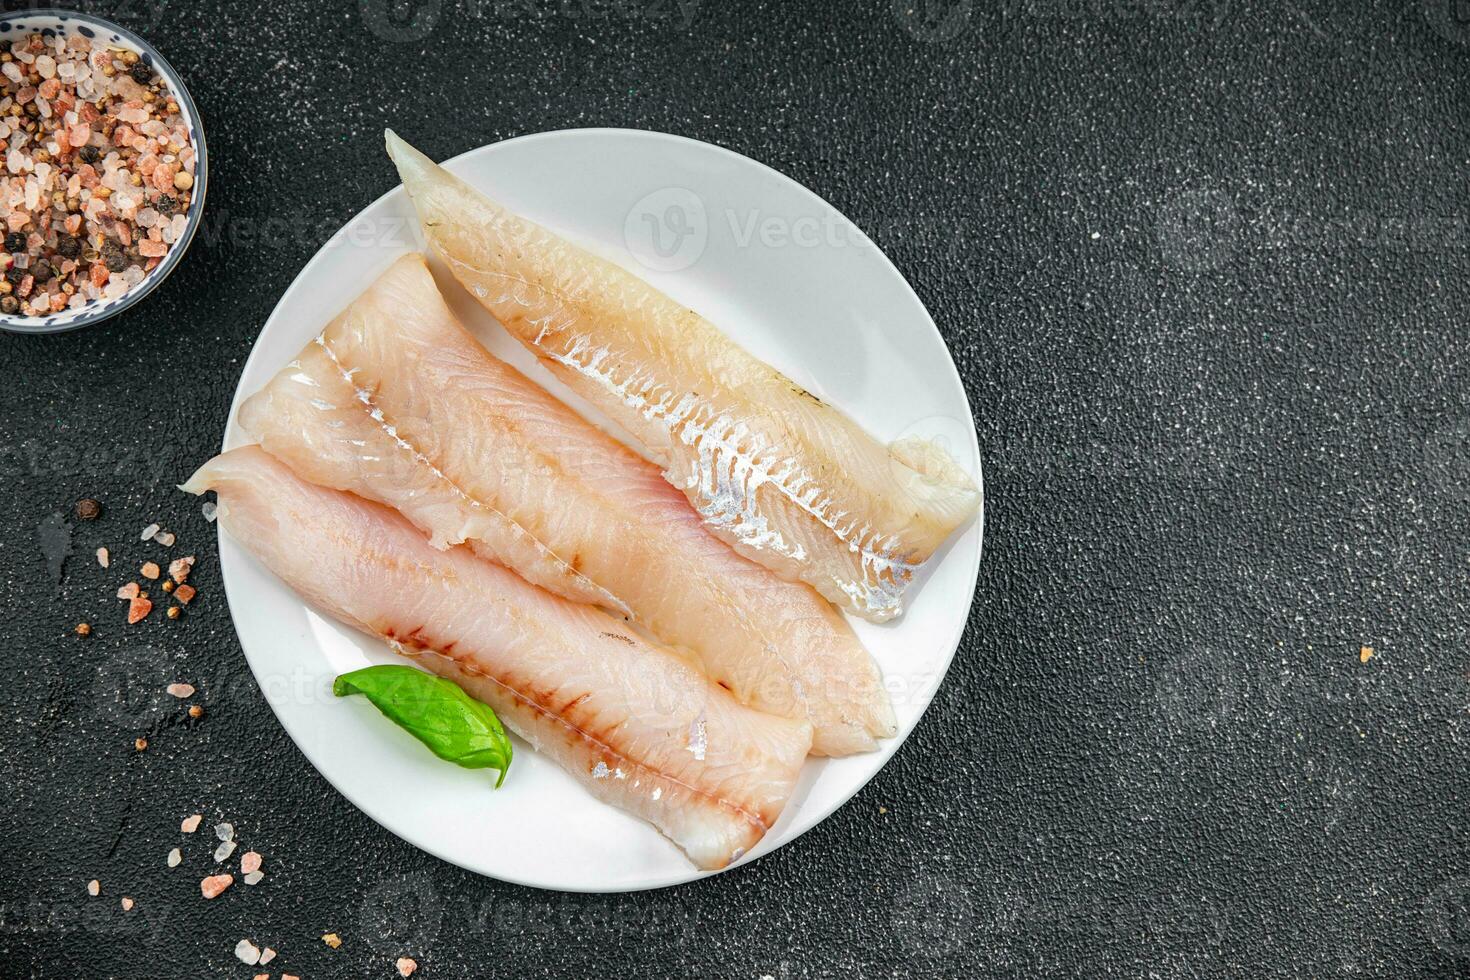 blue whiting fish fillet fresh seafood delicious healthy eating Pescetarian cooking appetizer meal food snack on the table copy space food background rustic top view photo